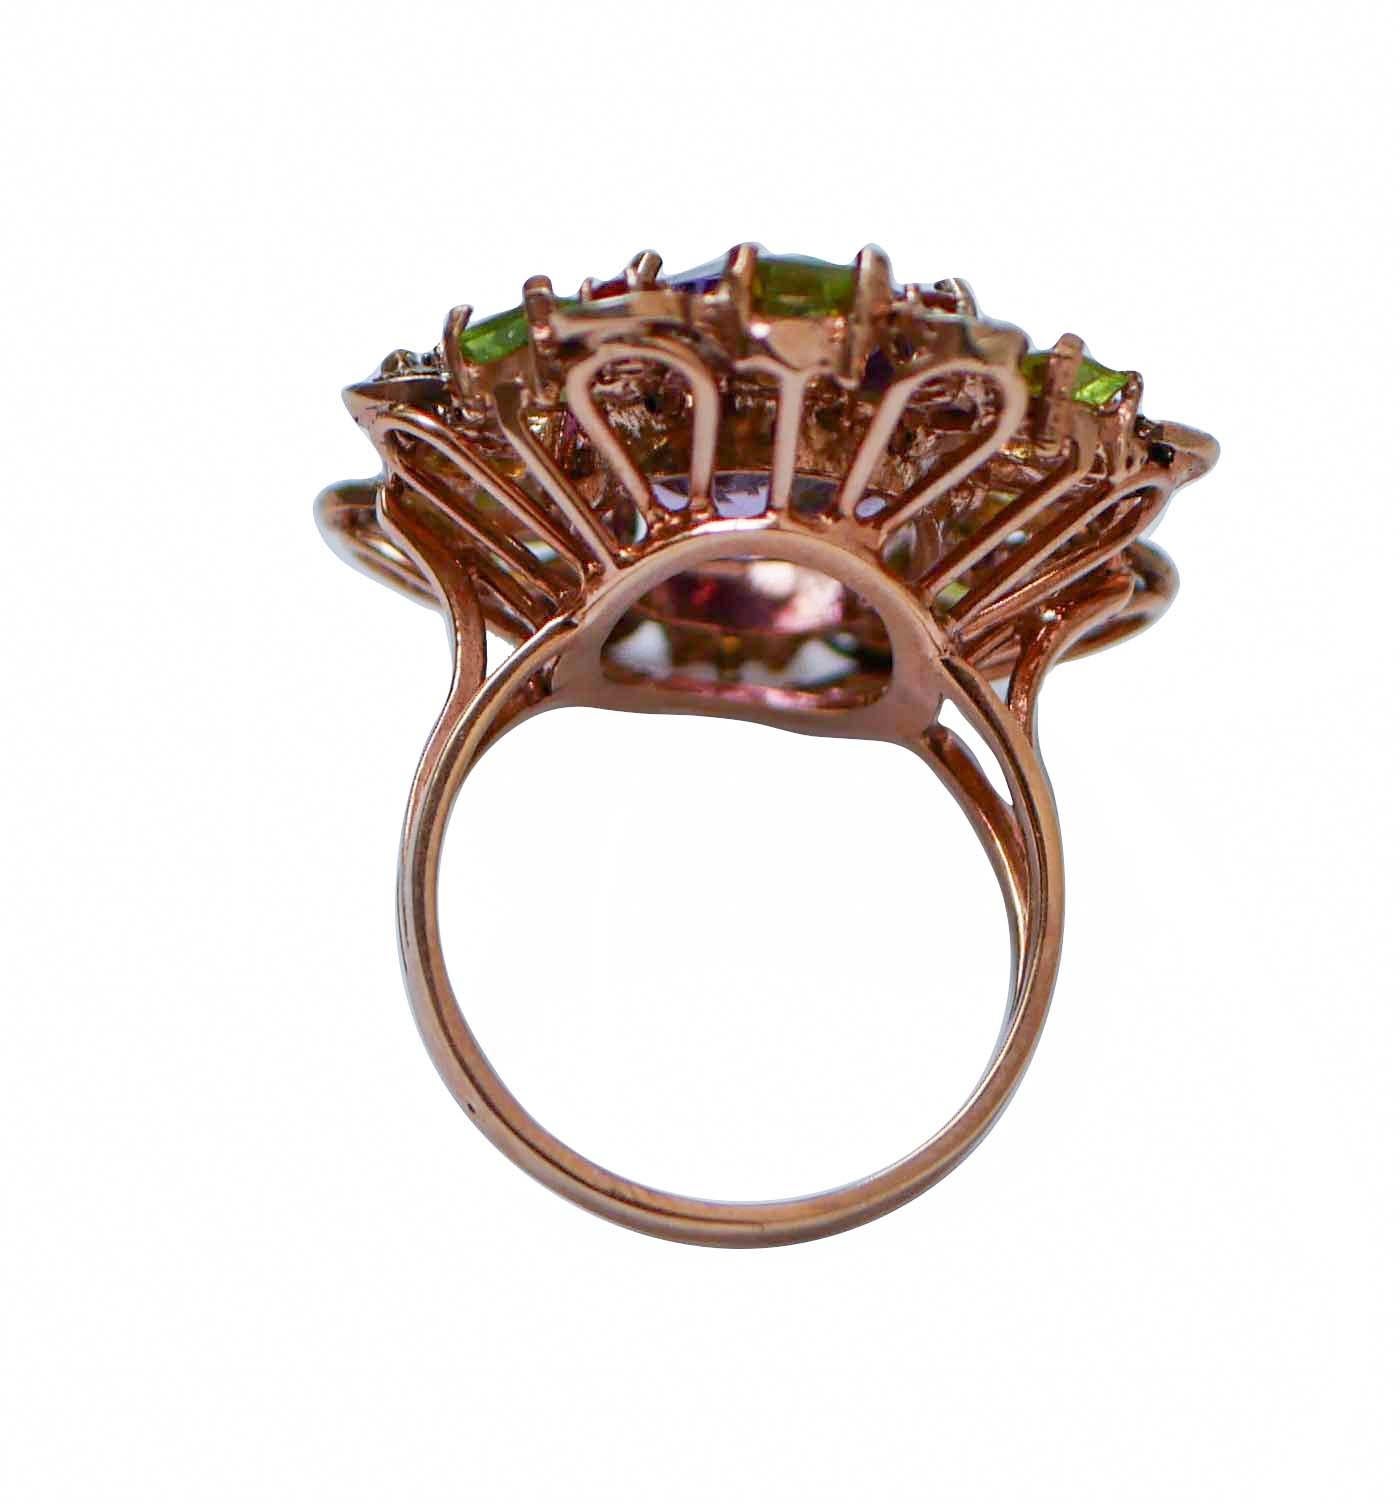 Retro Amethyst, Peridots, Garnets, Diamonds, Rose Gold and Silver Ring. For Sale